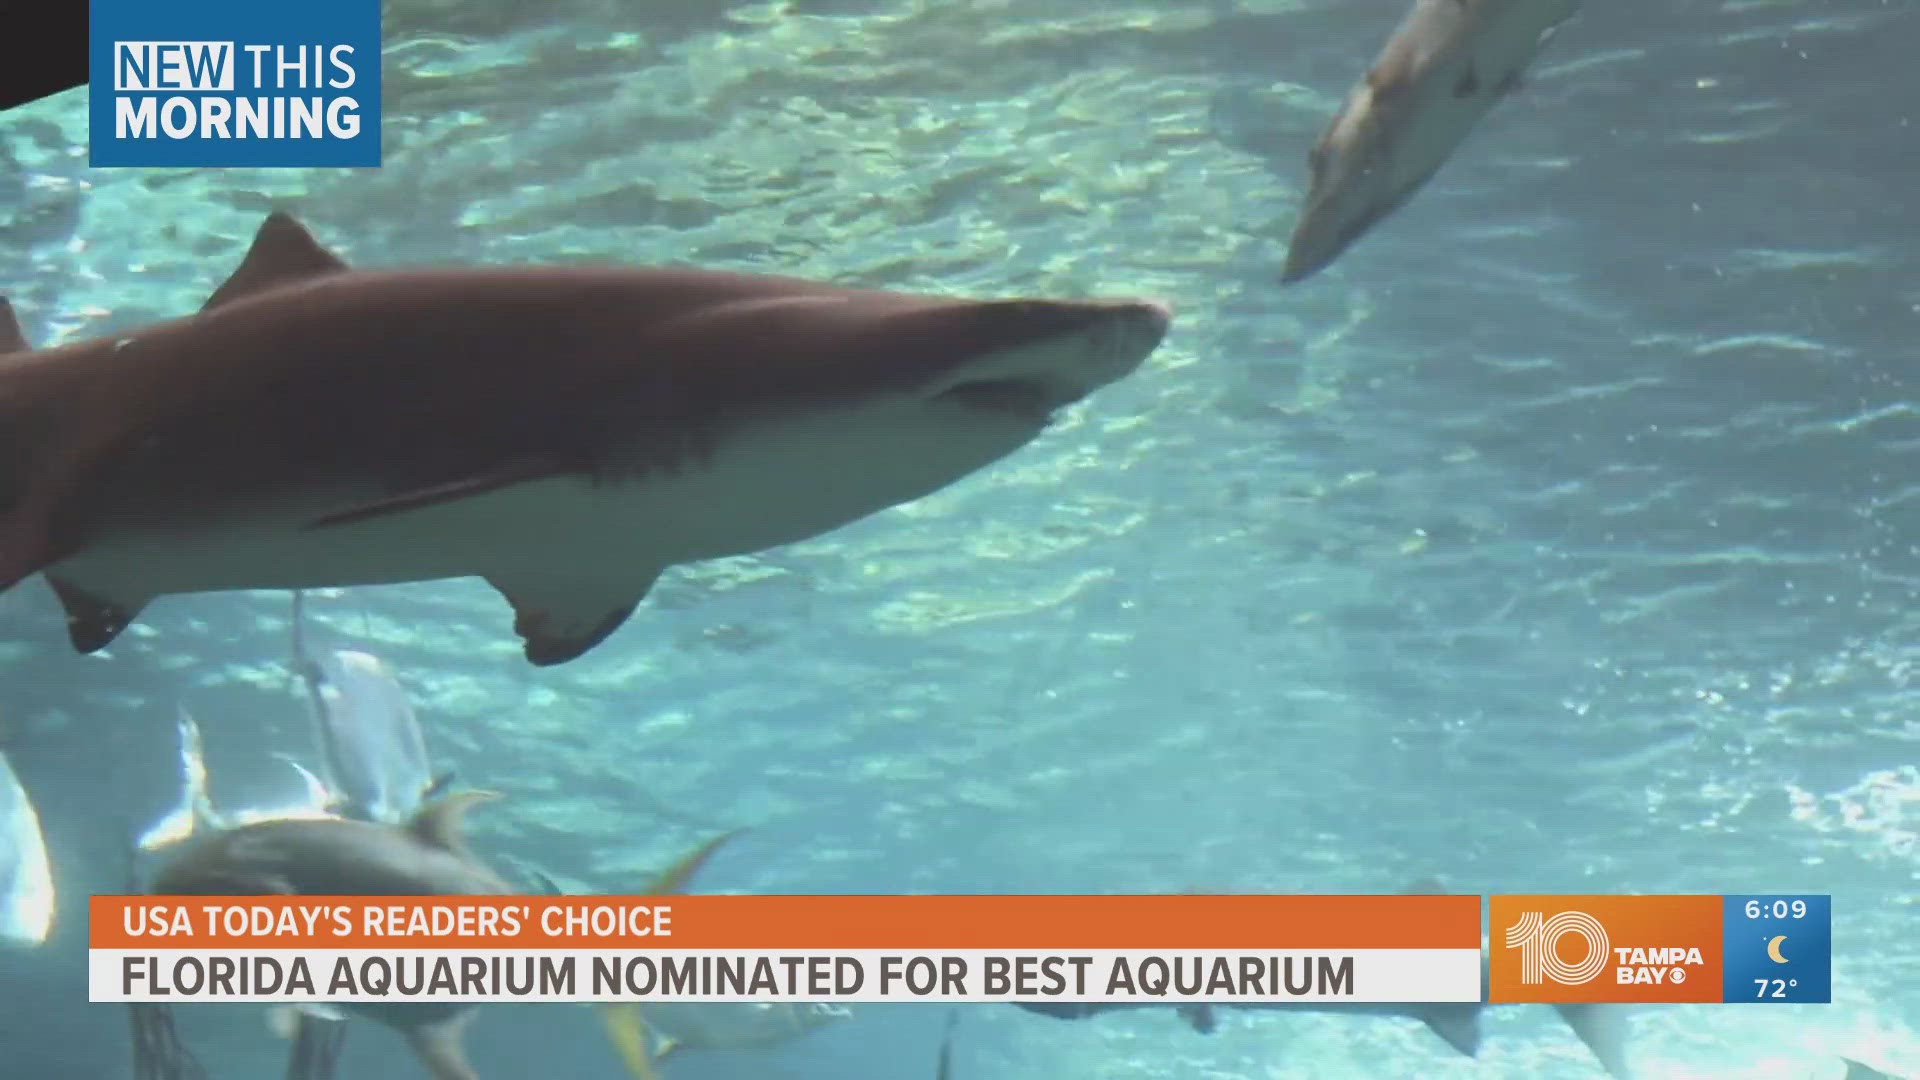 You can vote for the Tampa Bay area aquarium to be awarded as the best in the nation, according to USA Today.